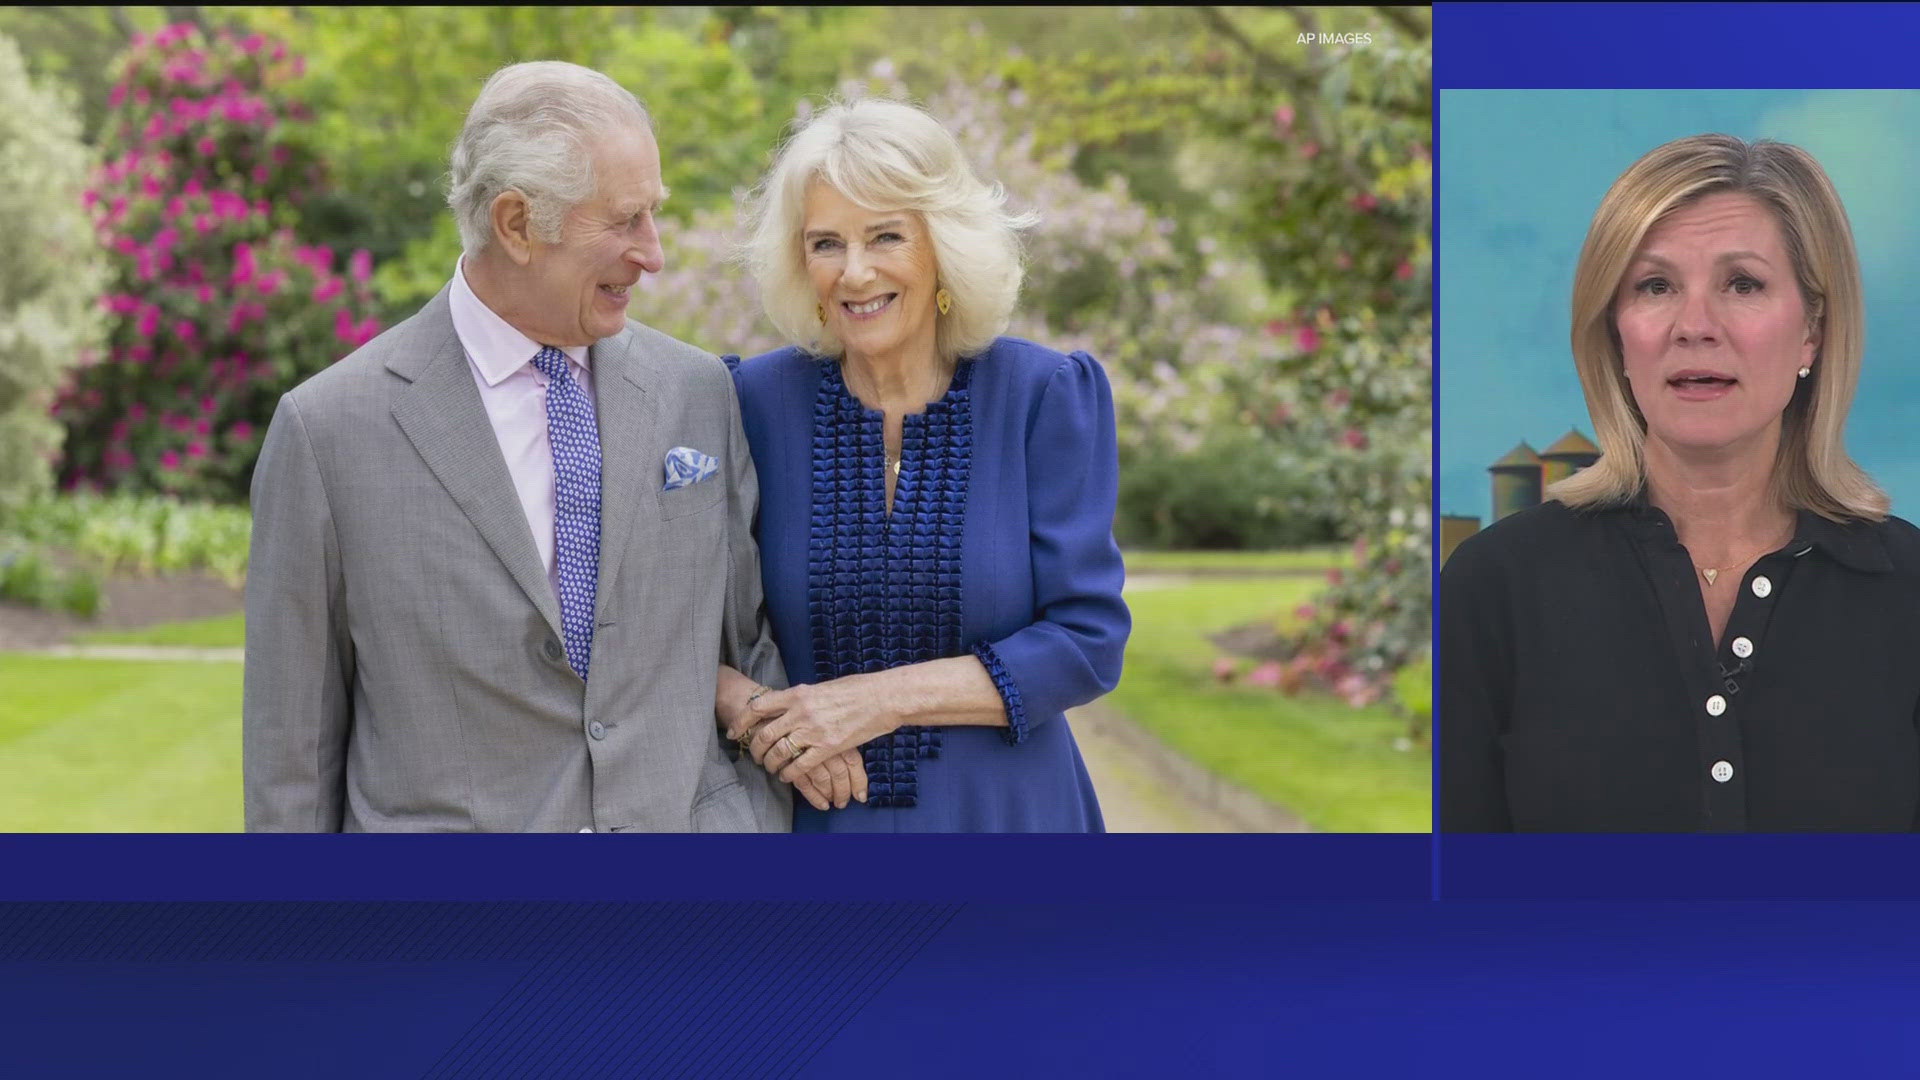 The palace says Charles will make a public visit to a cancer treatment center on Tuesday, the first of several appearances he will make in coming weeks.